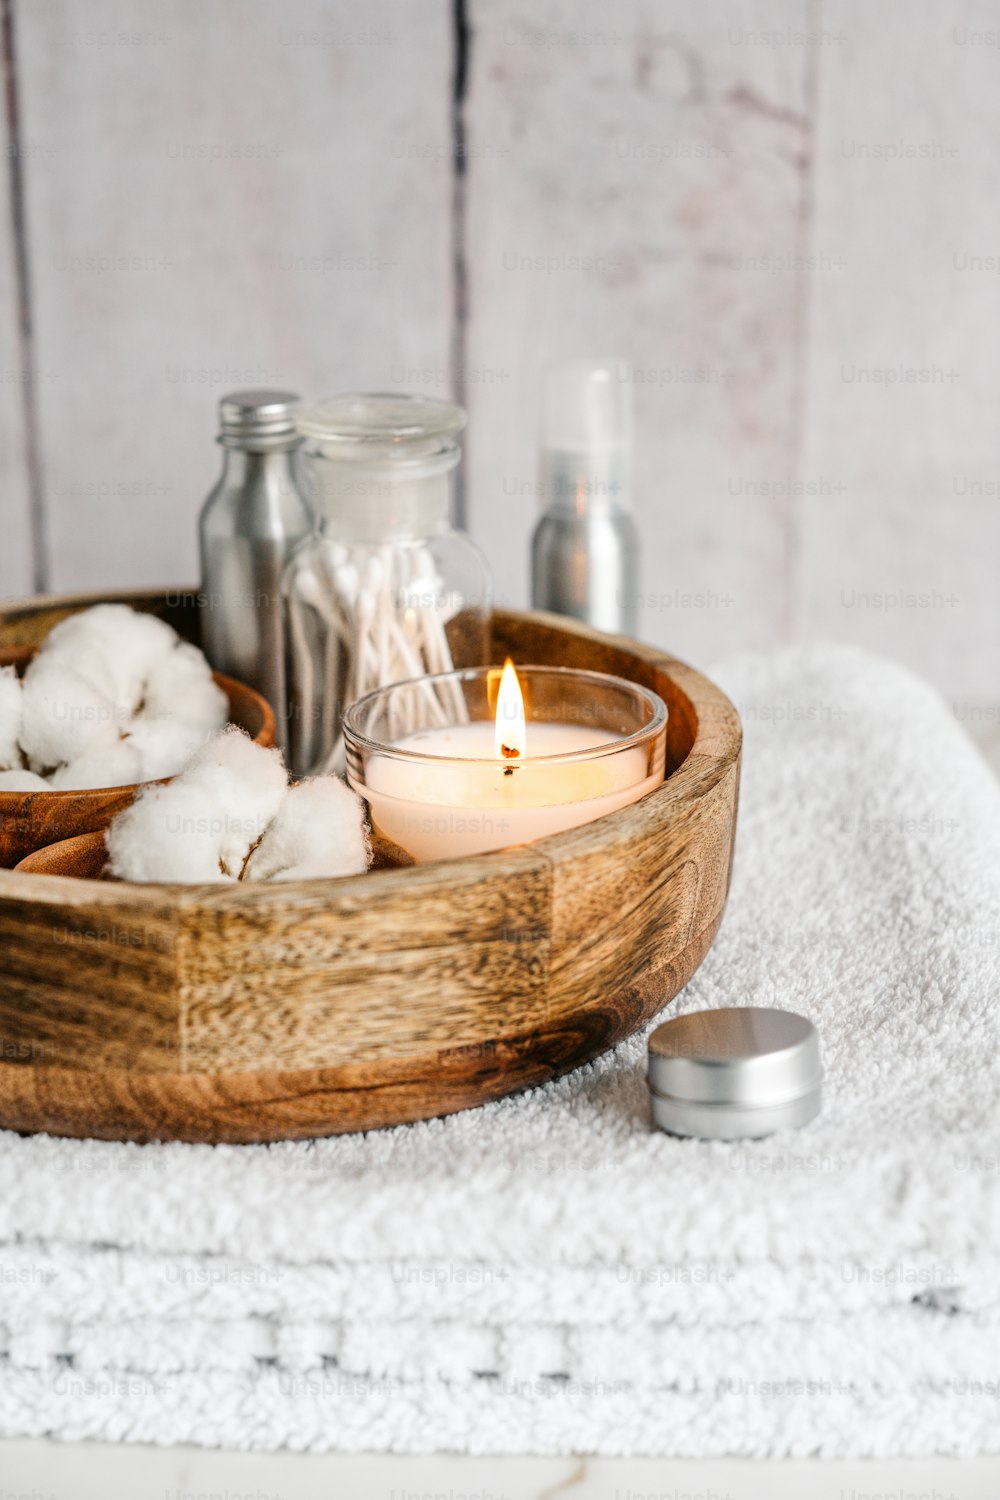 a wooden bowl filled with cotton and a candle